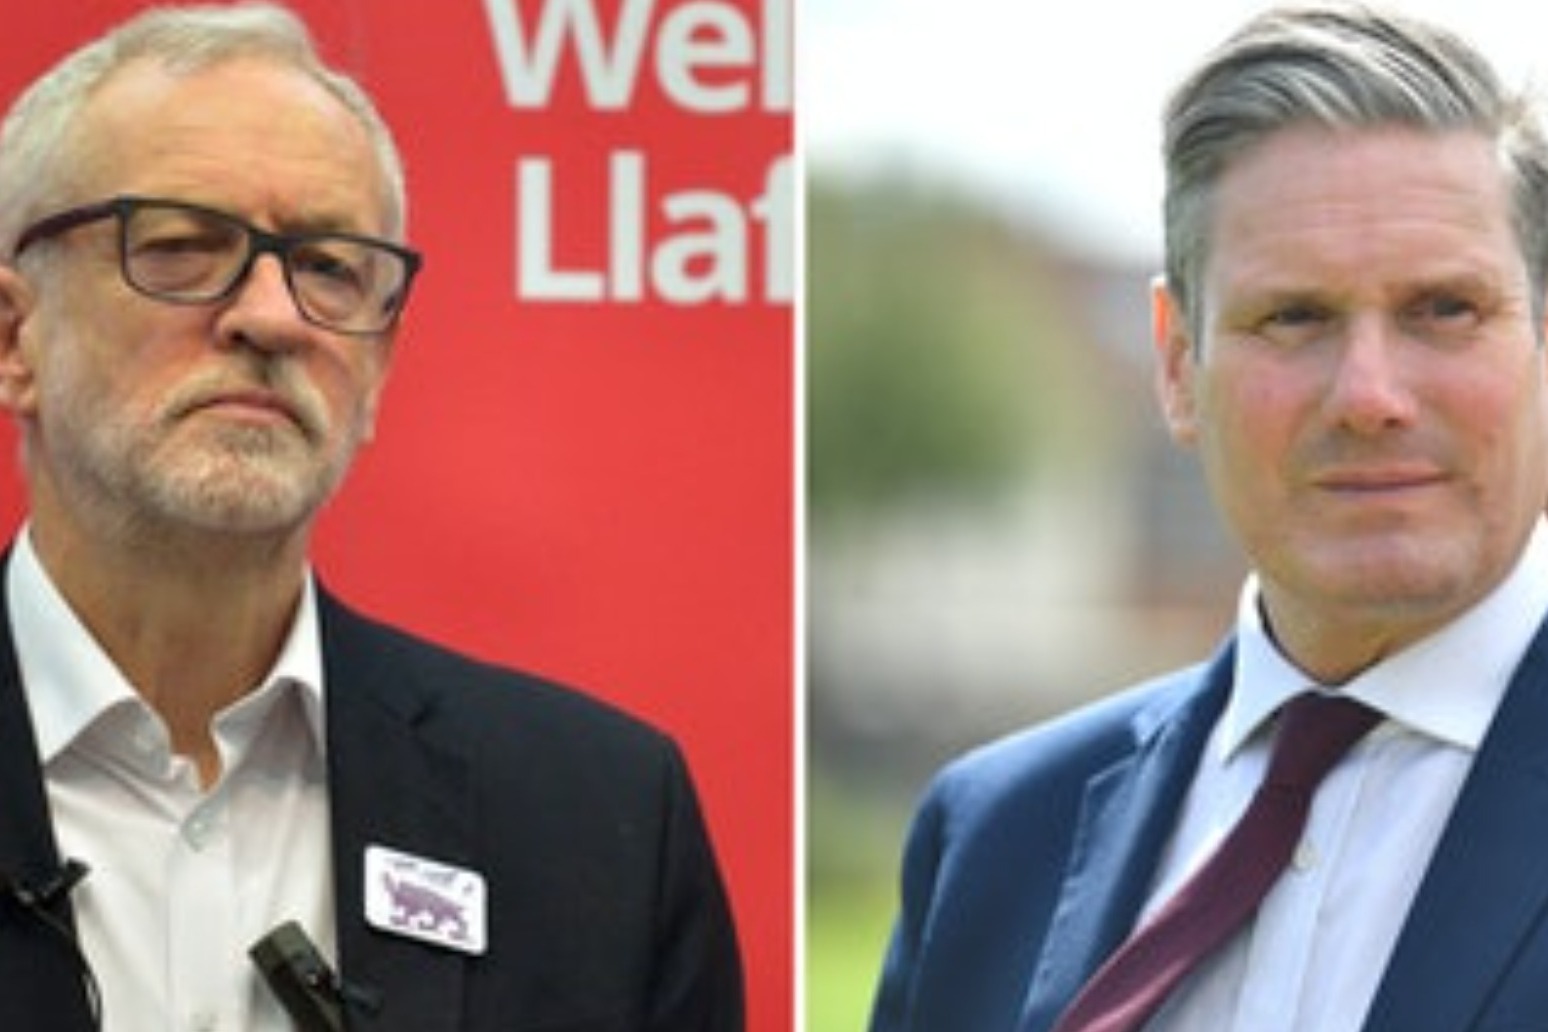 Jeremy Corbyn will not have Labour whip restored, Sir Keir Starmer says 